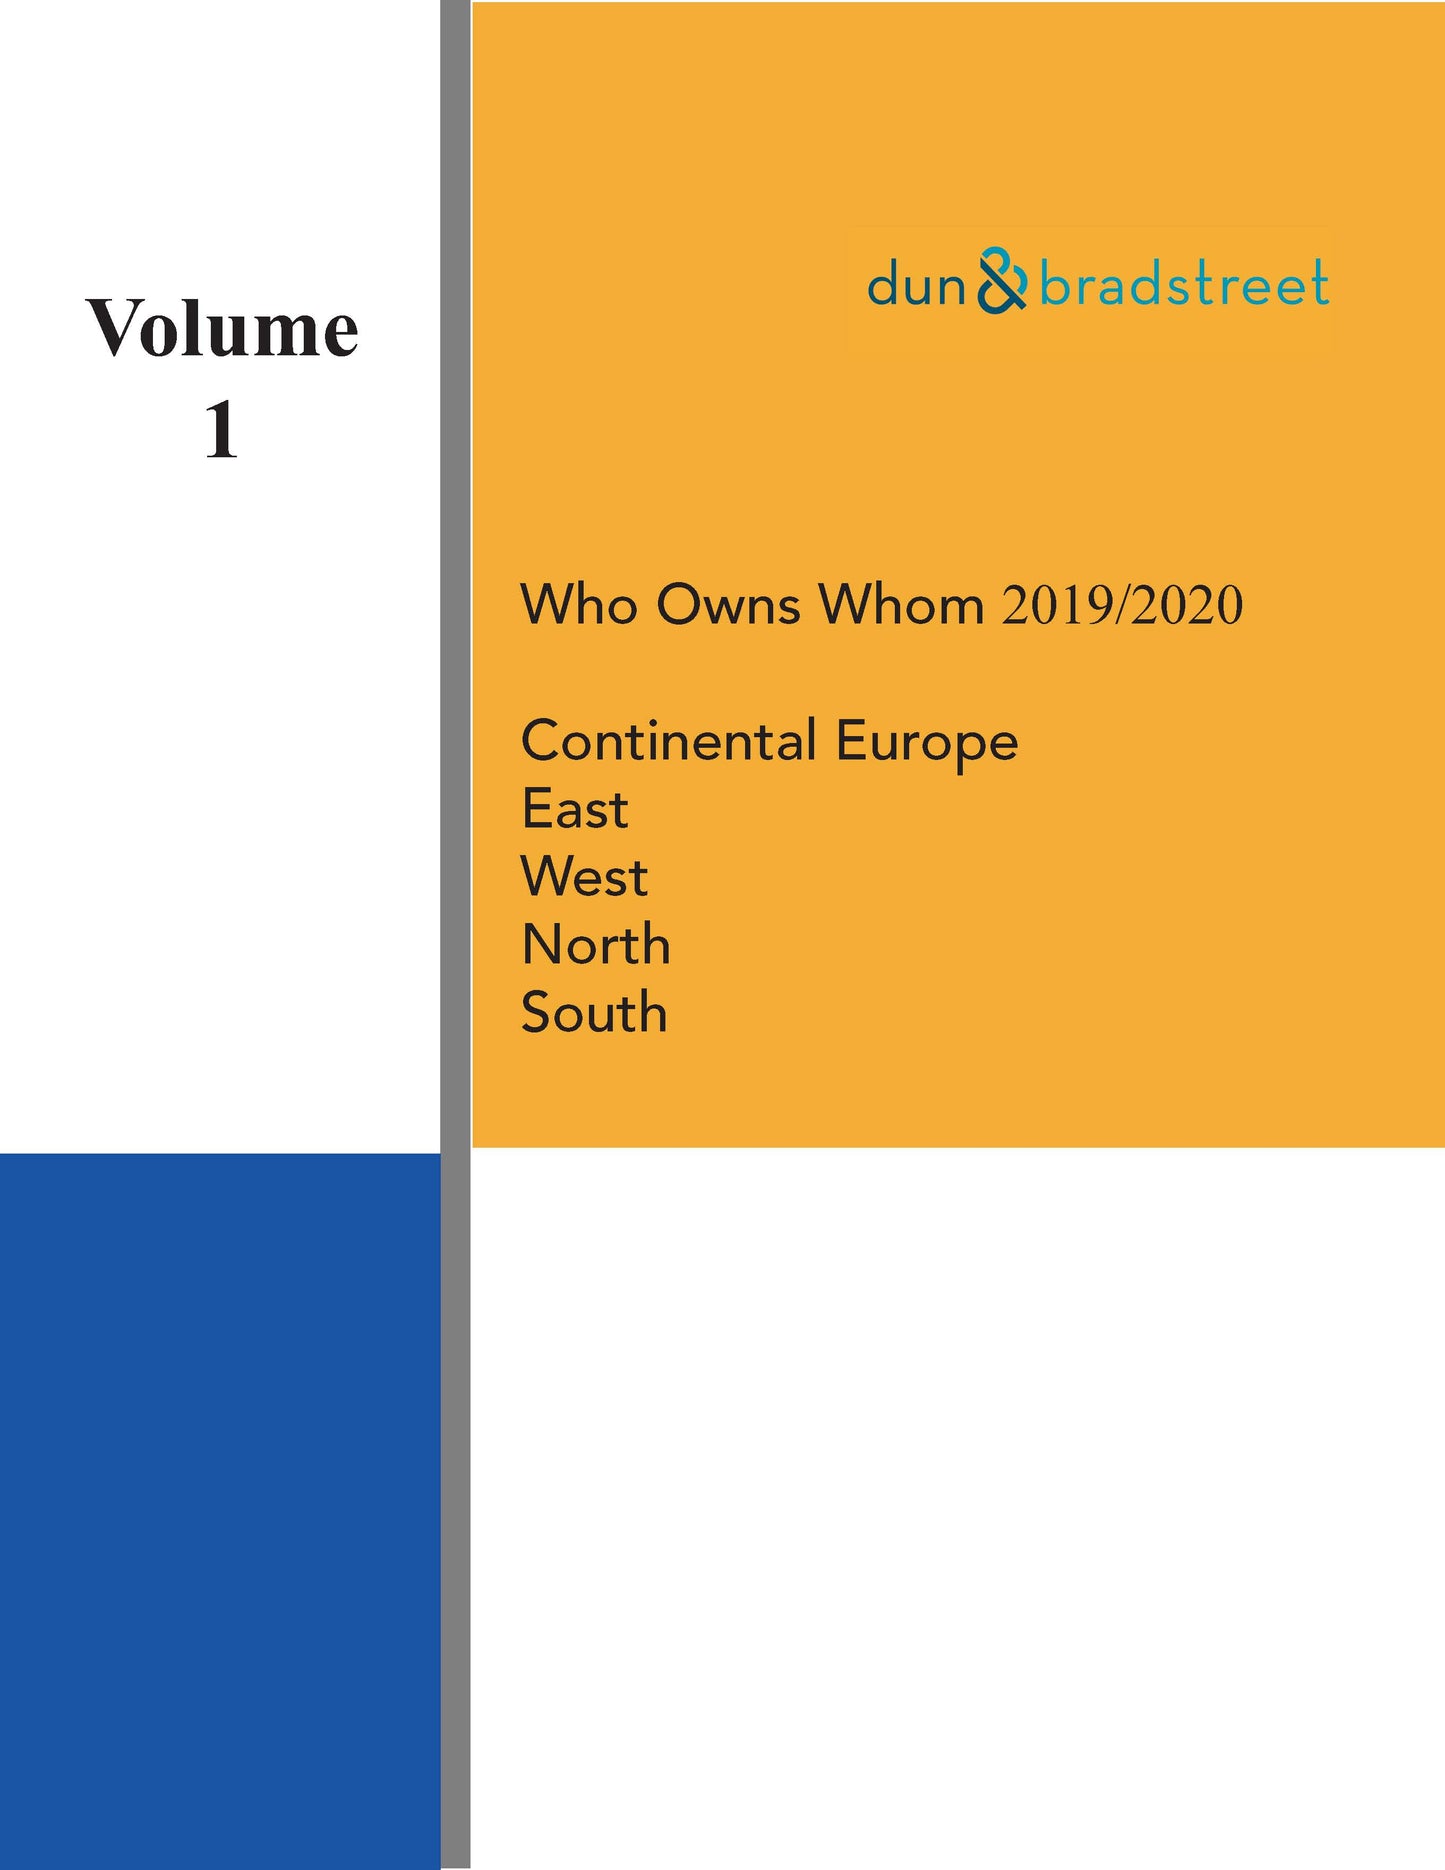 Who Owns Whom - Continental Europe (6 volumes)